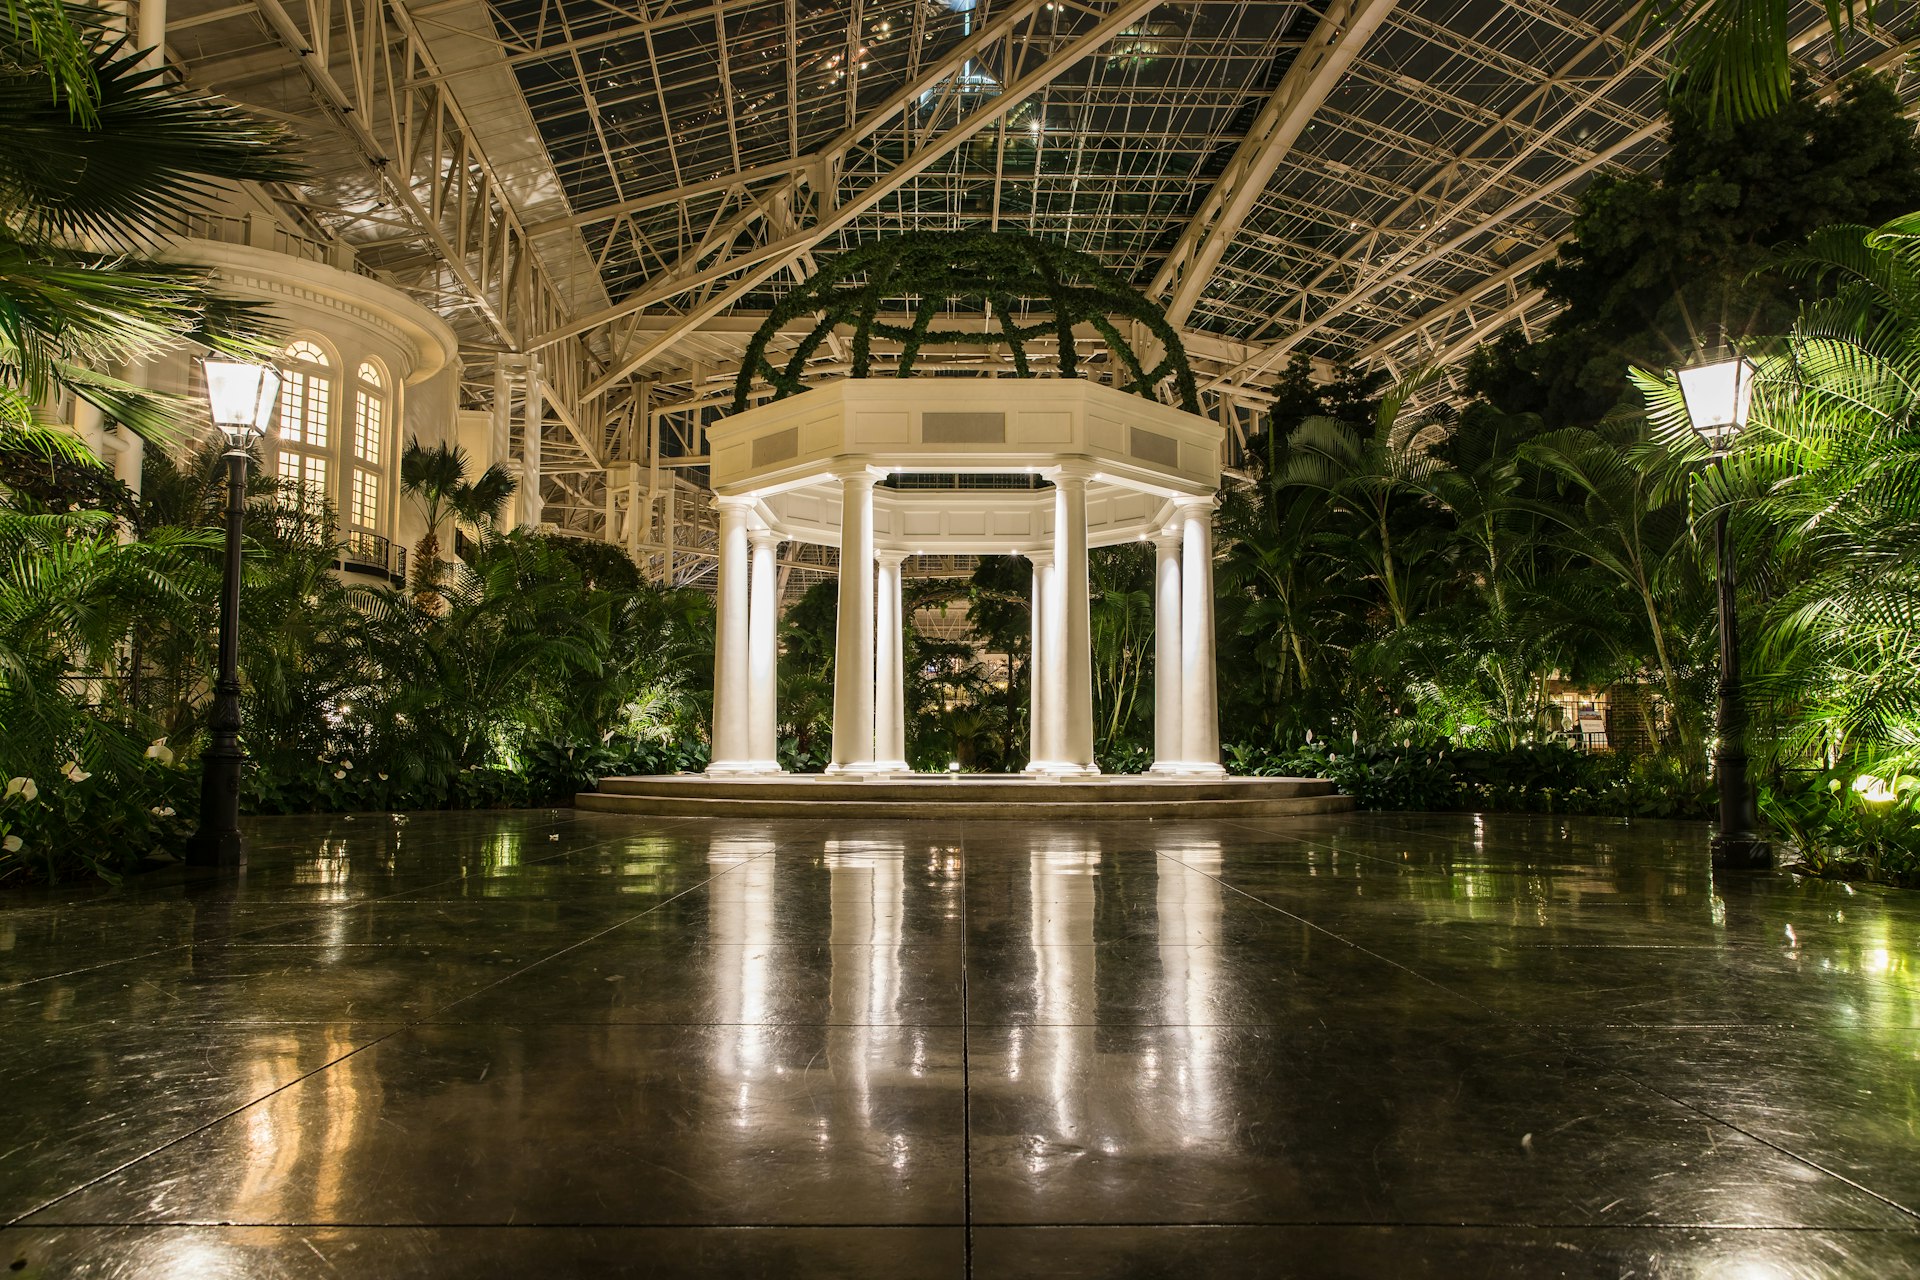 The Gaylord Opryland Hotel & Convention Center has an atrium with this gazebo fountain